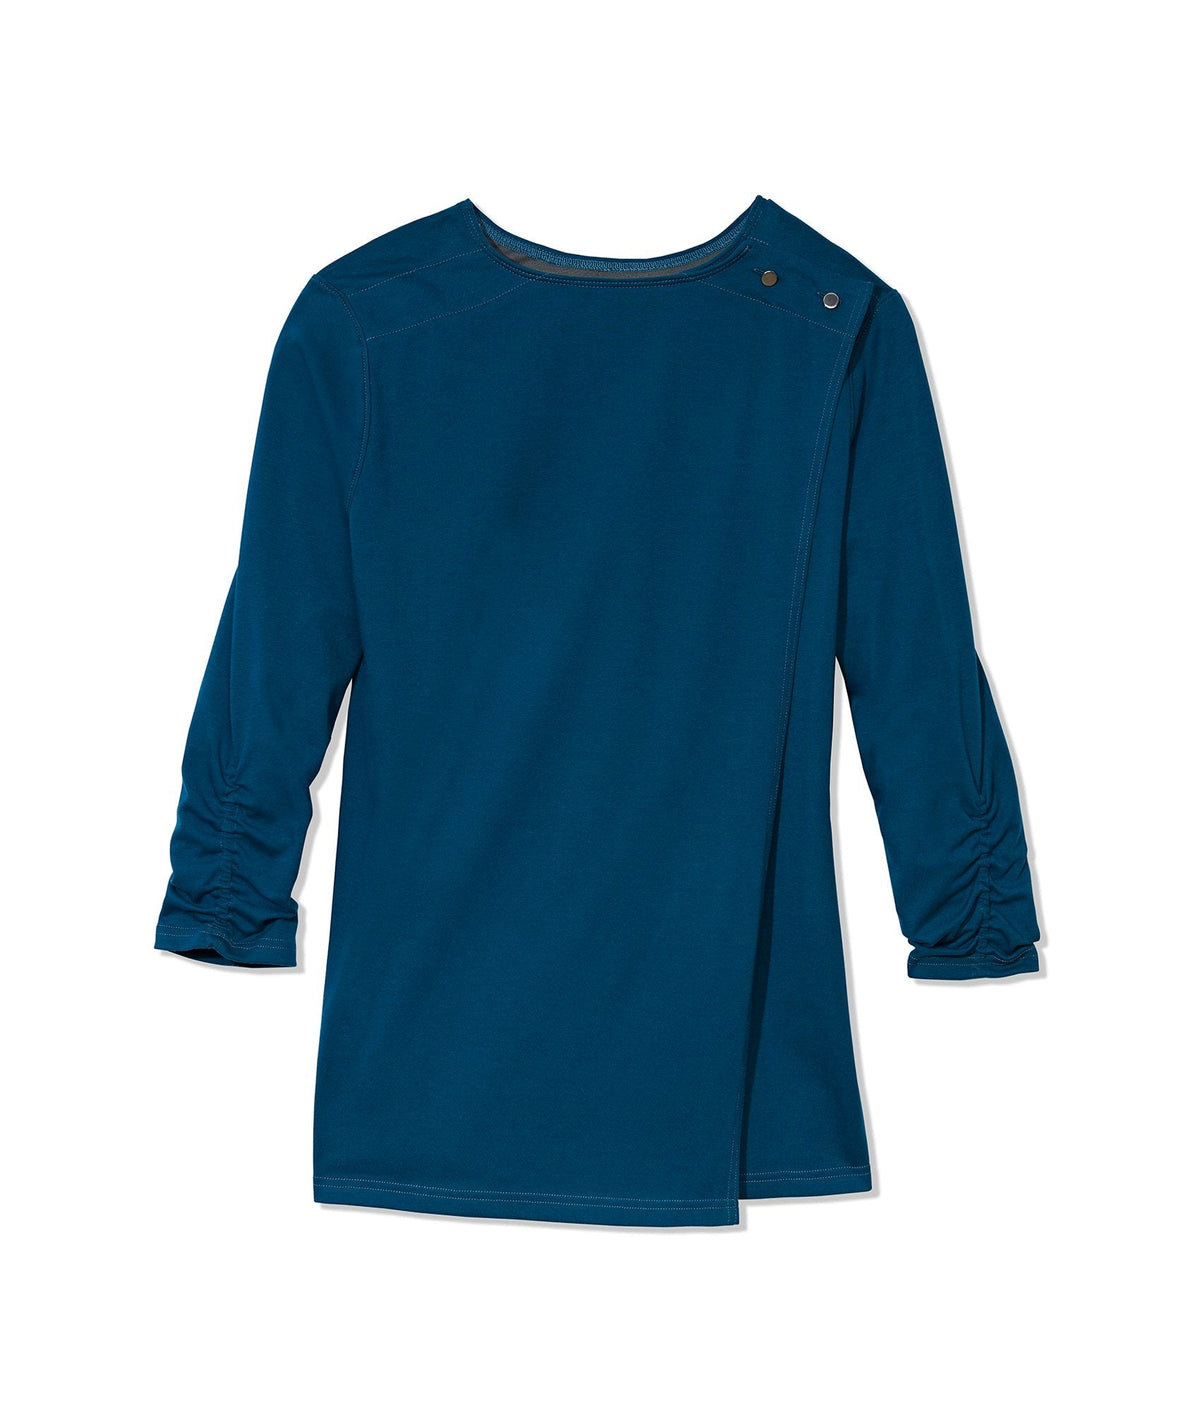 The Bonnie Long Sleeve Cotton Knit Tunic in Blue Opal